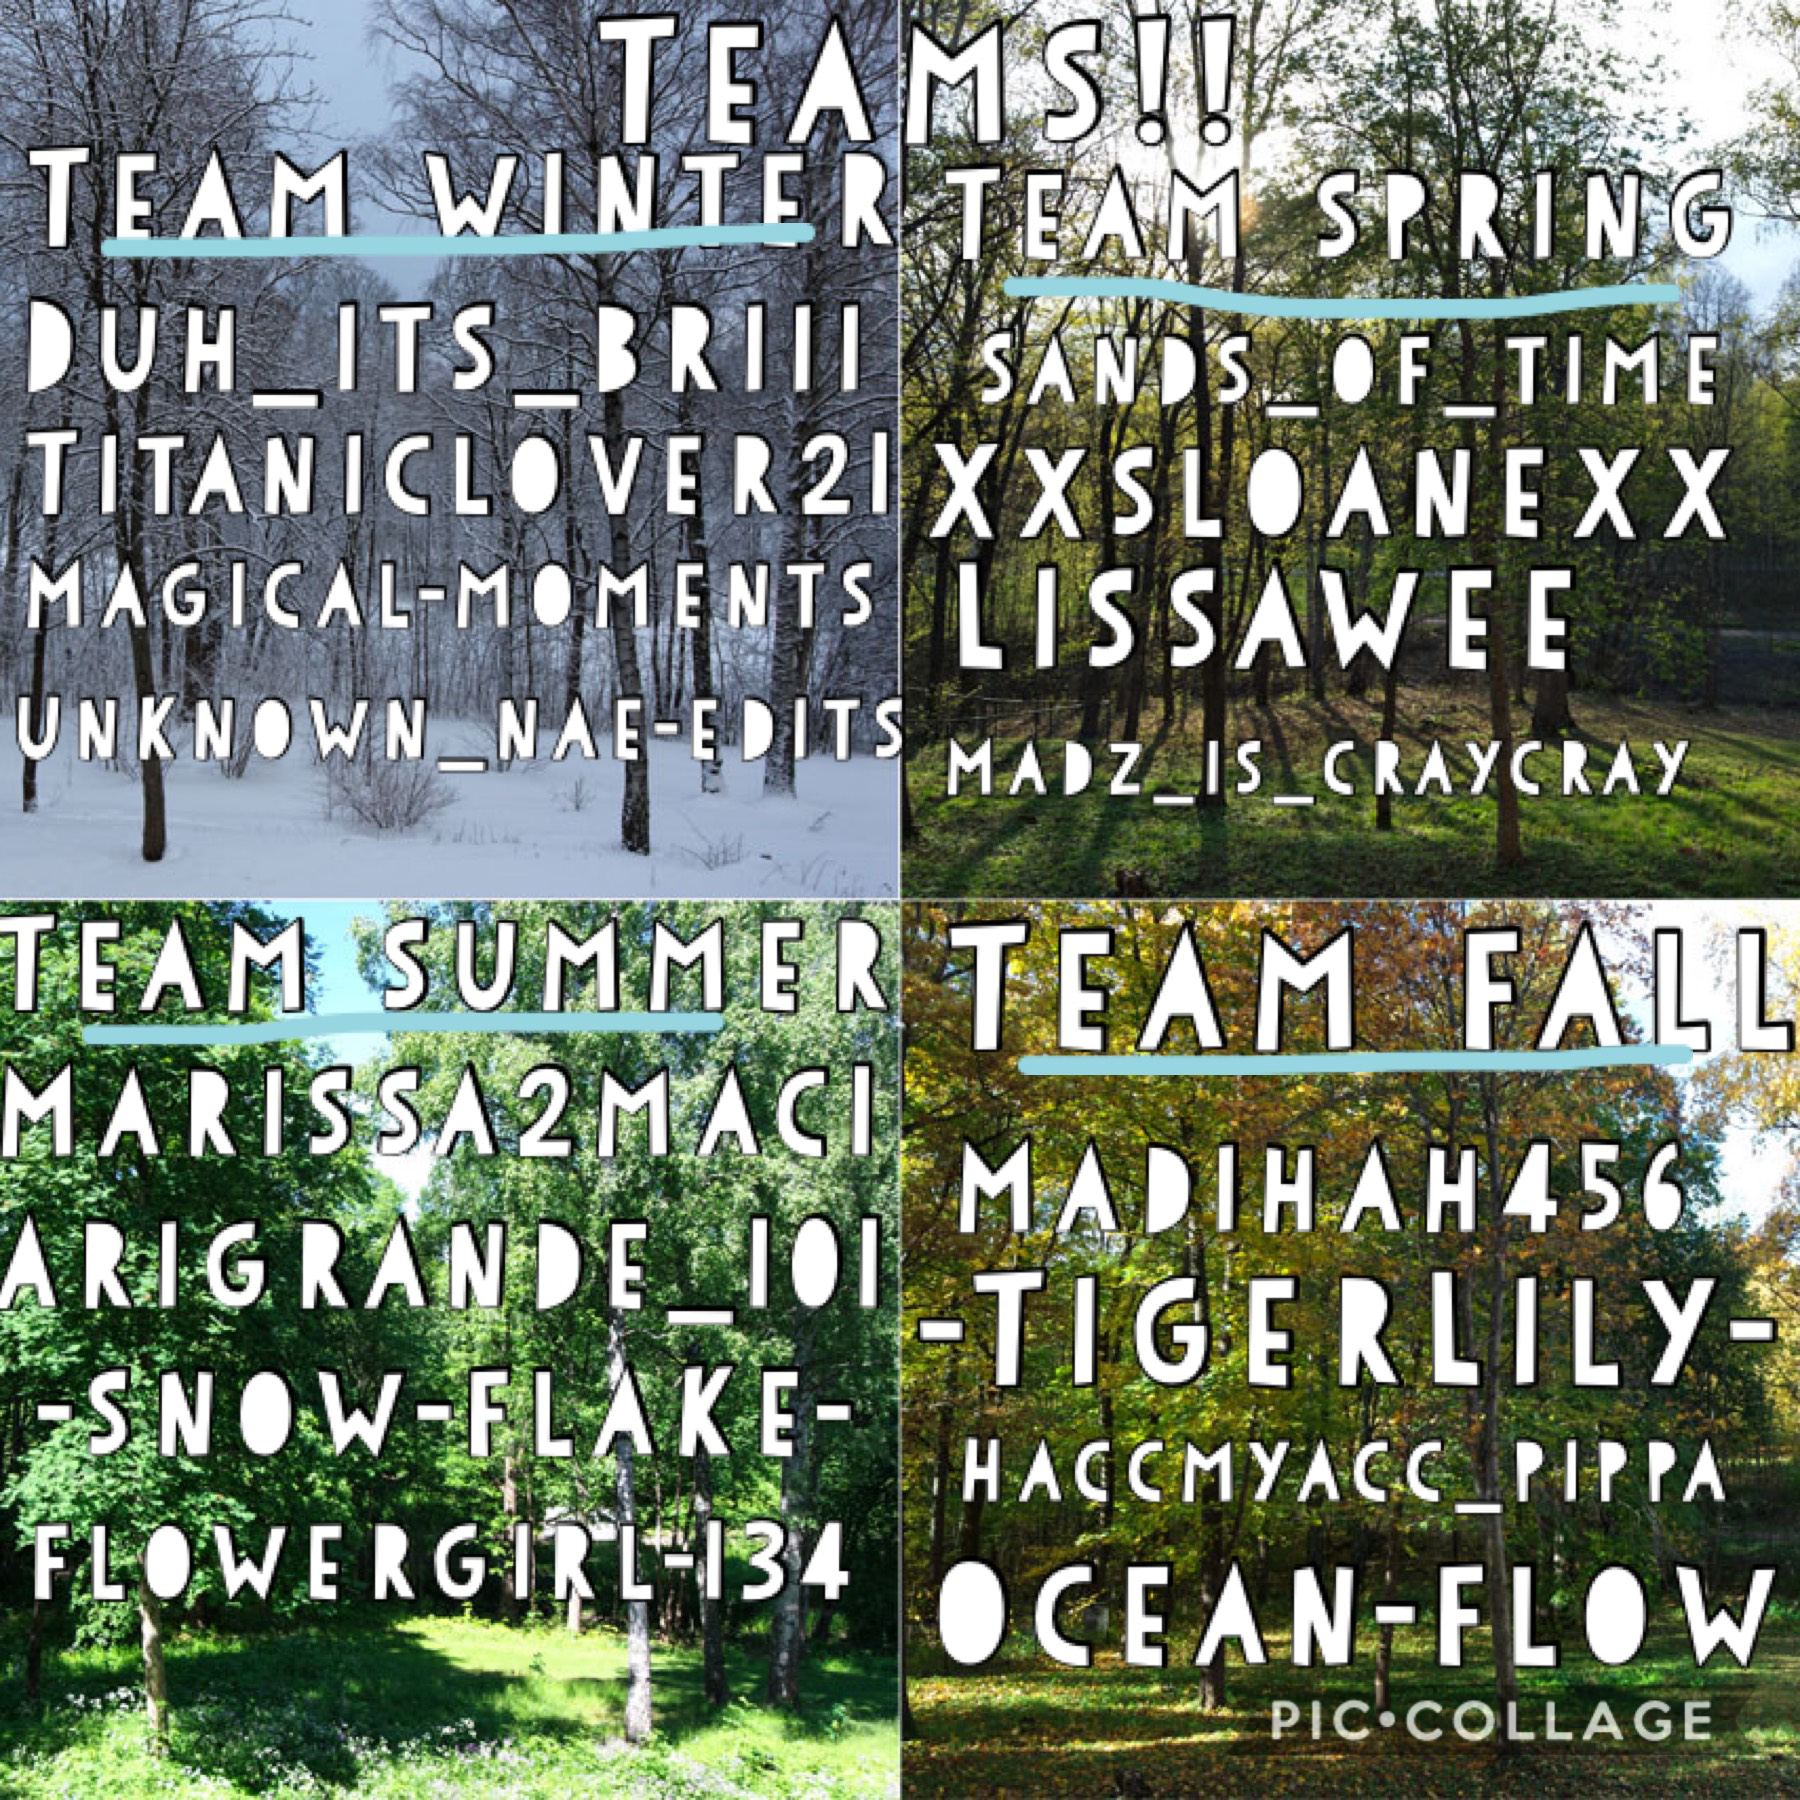 These are the teams for my season games!! Round 1 will be up soon!